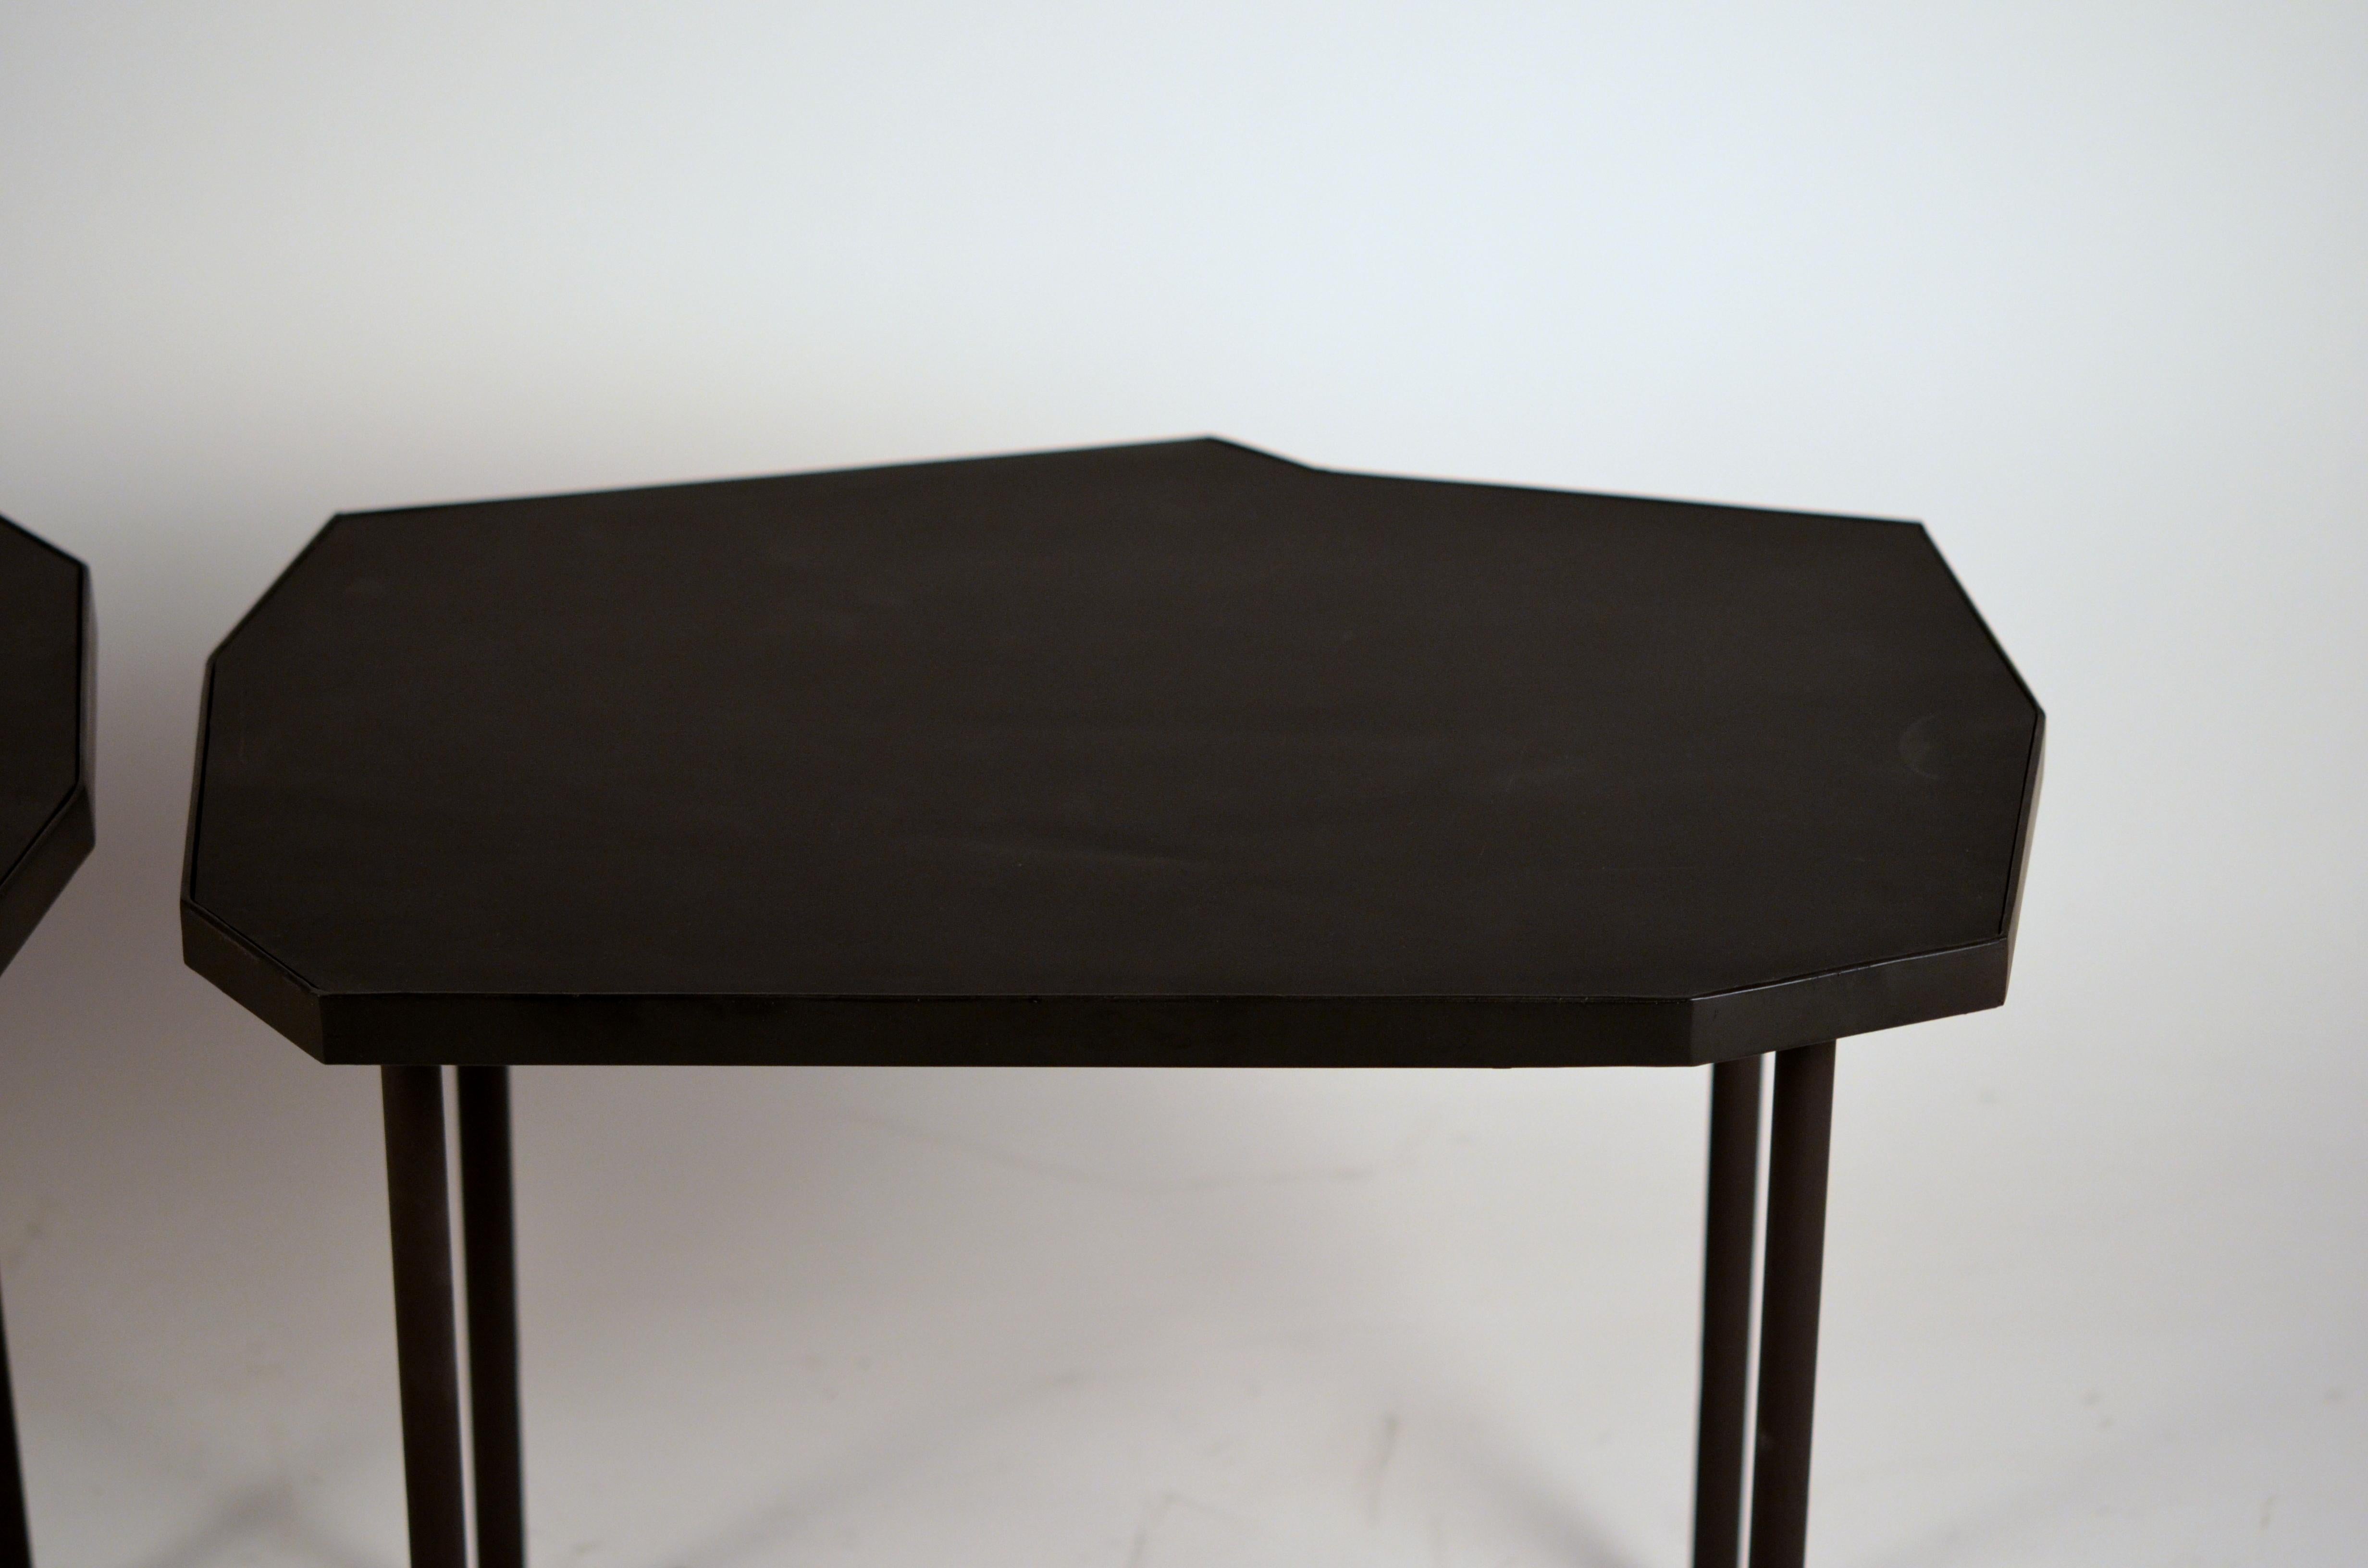 French Pair of Asymmetrical 'Décagone' Black Leather Side Tables by Design Frères For Sale